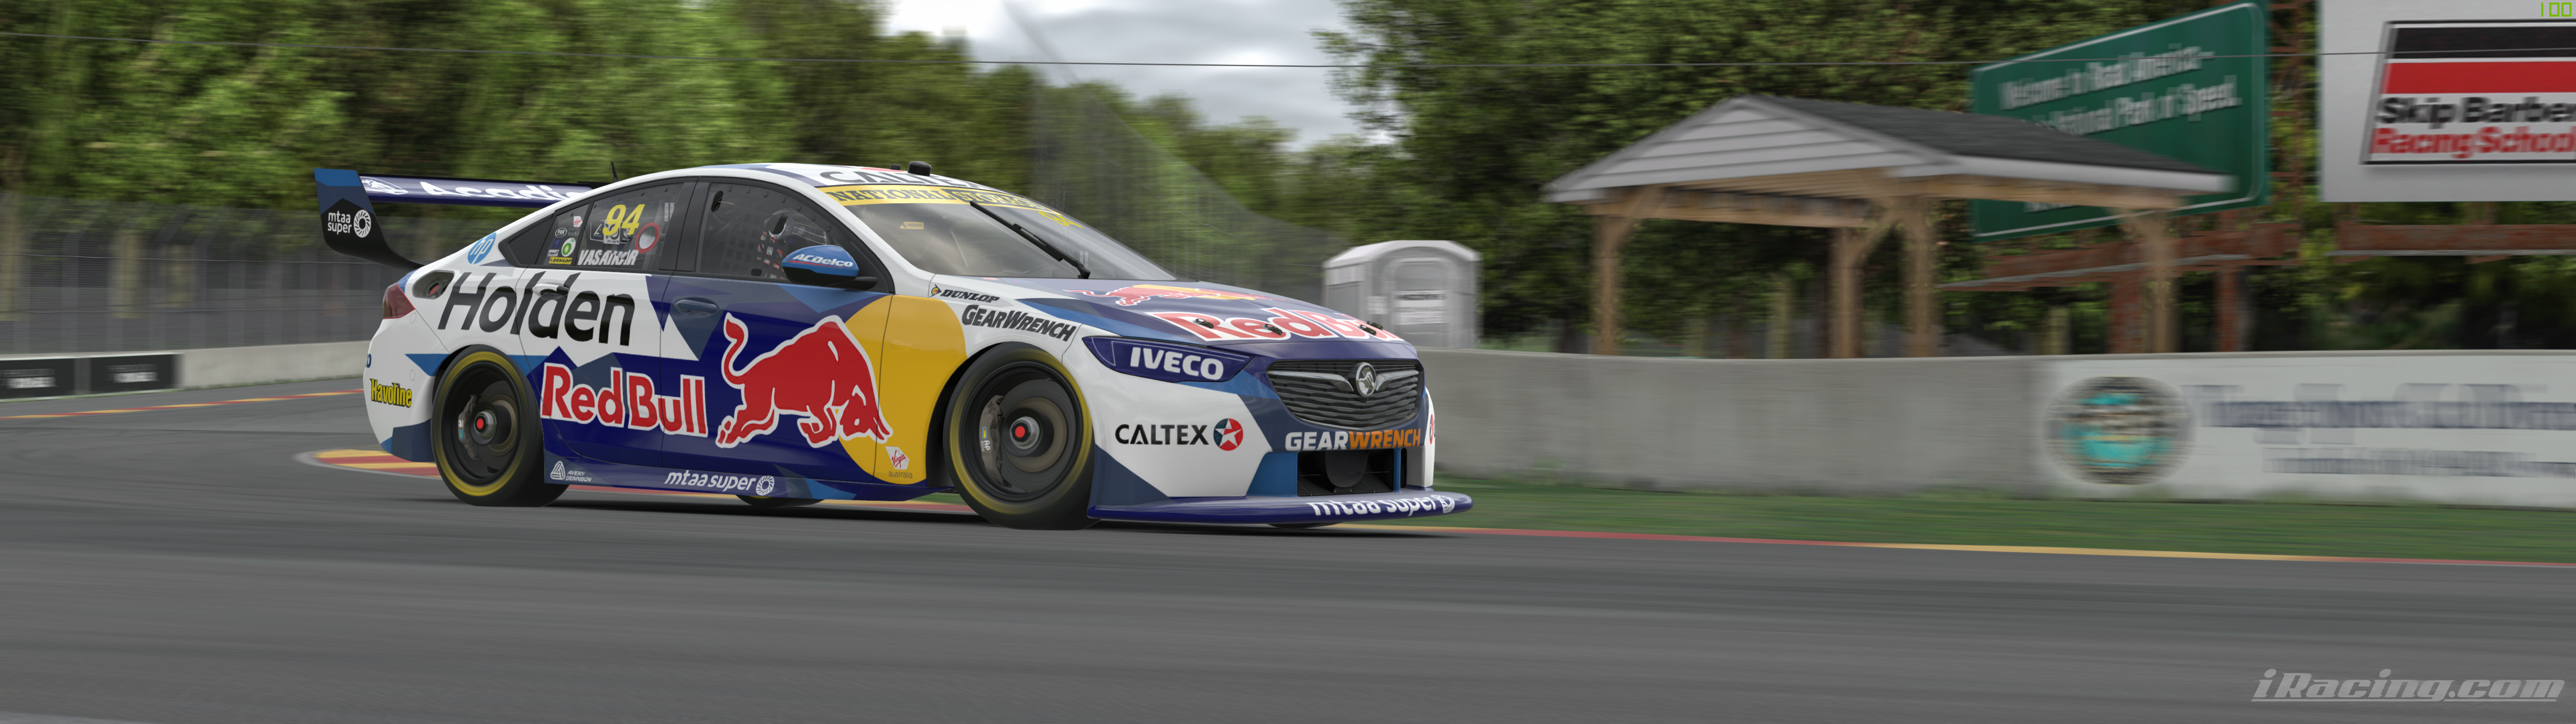 General 5120x1440 motorsport iRacing race cars supercars Australia Holden car livery video games